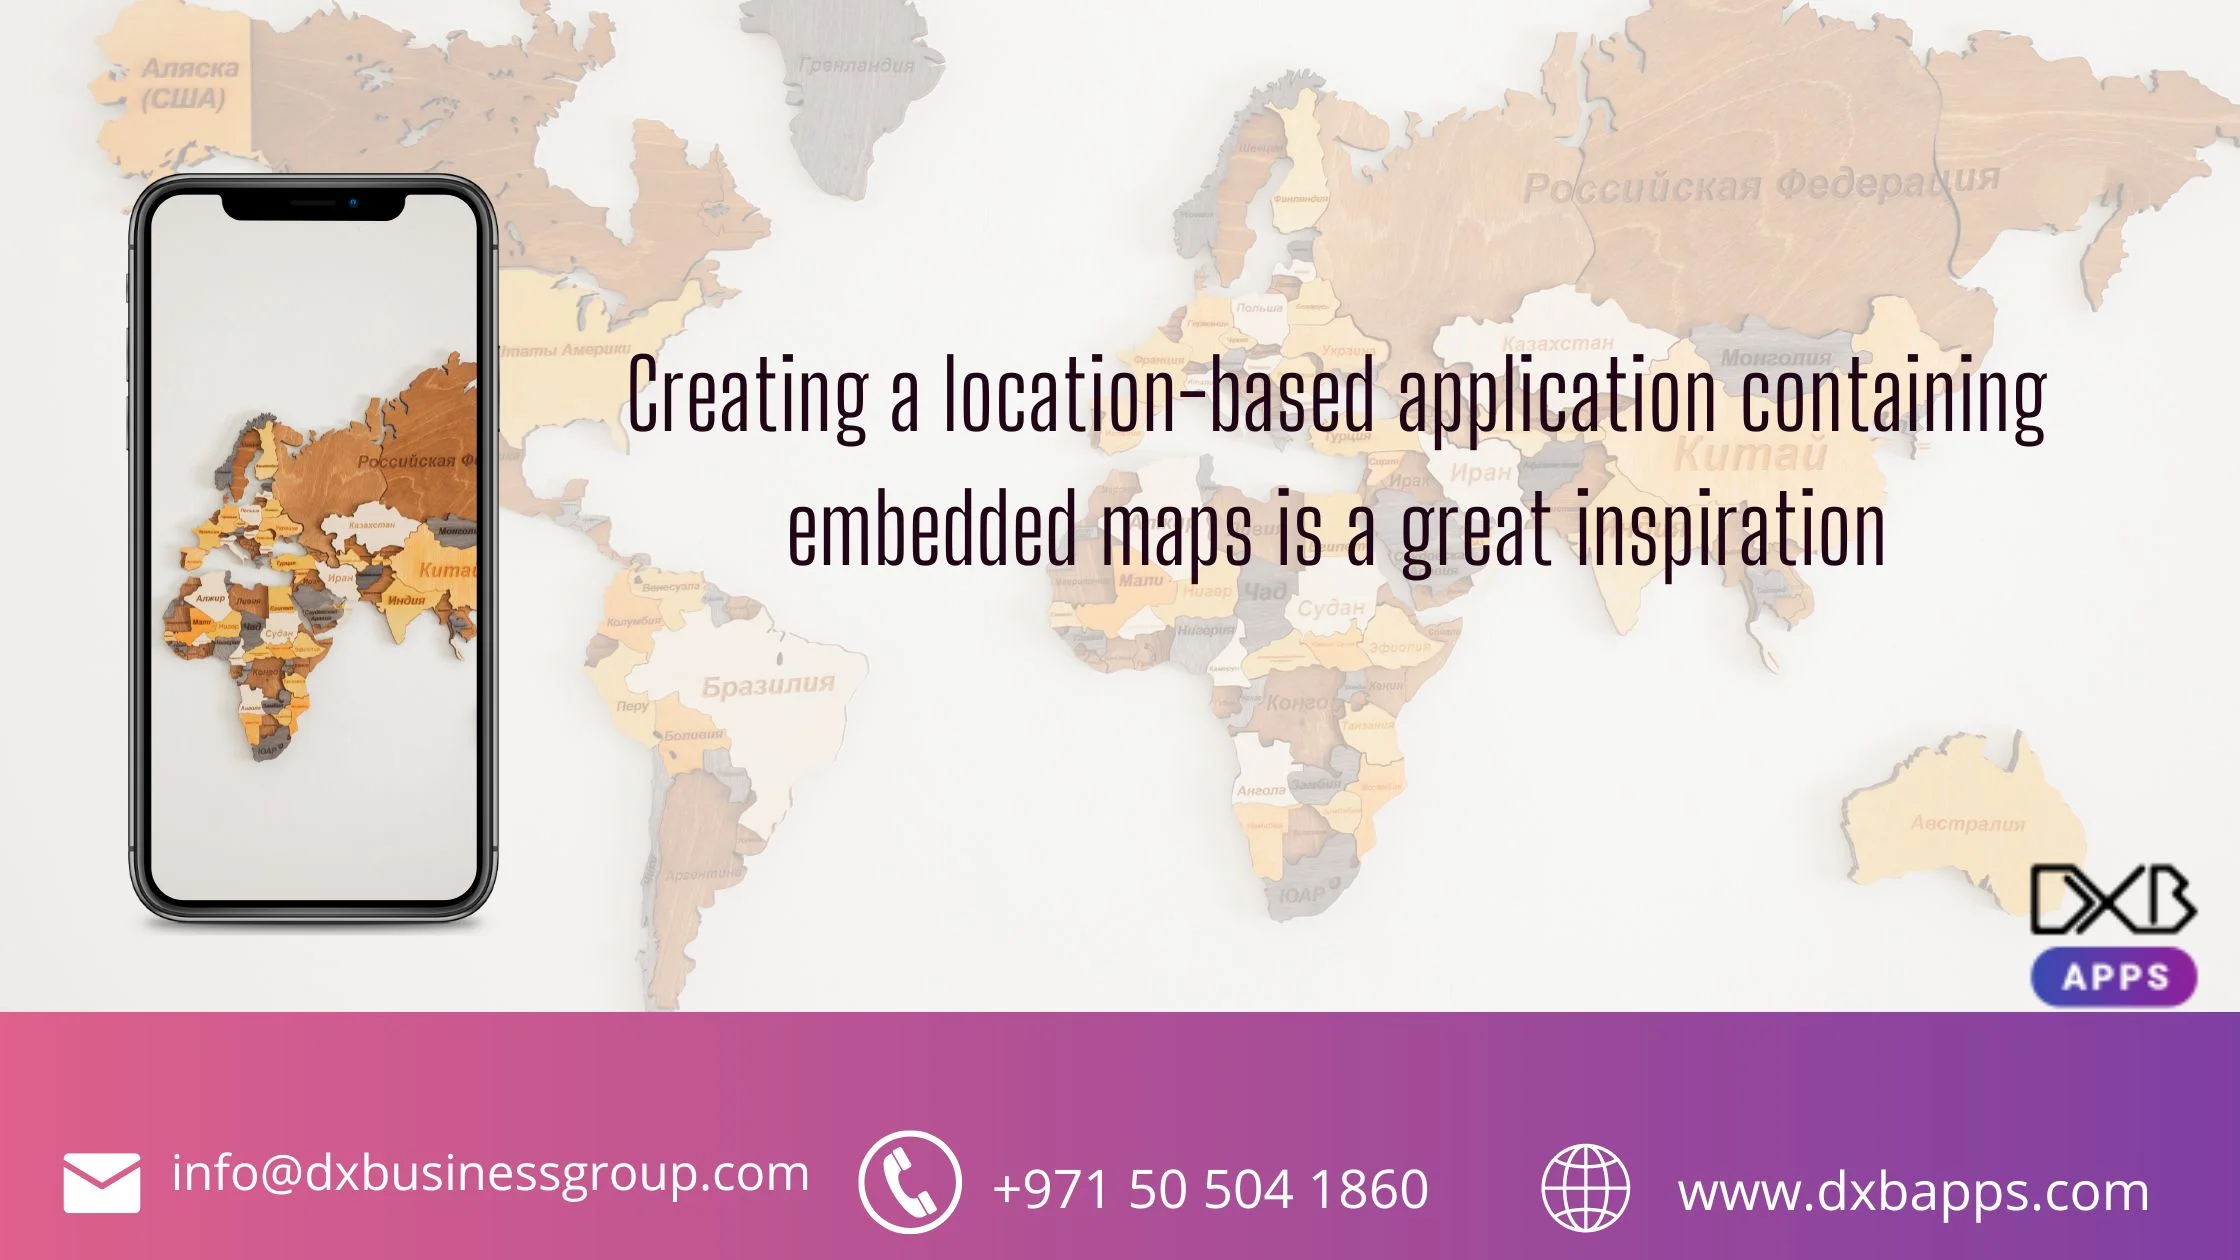  Creating a location-based application containing embedded maps is a great inspiration